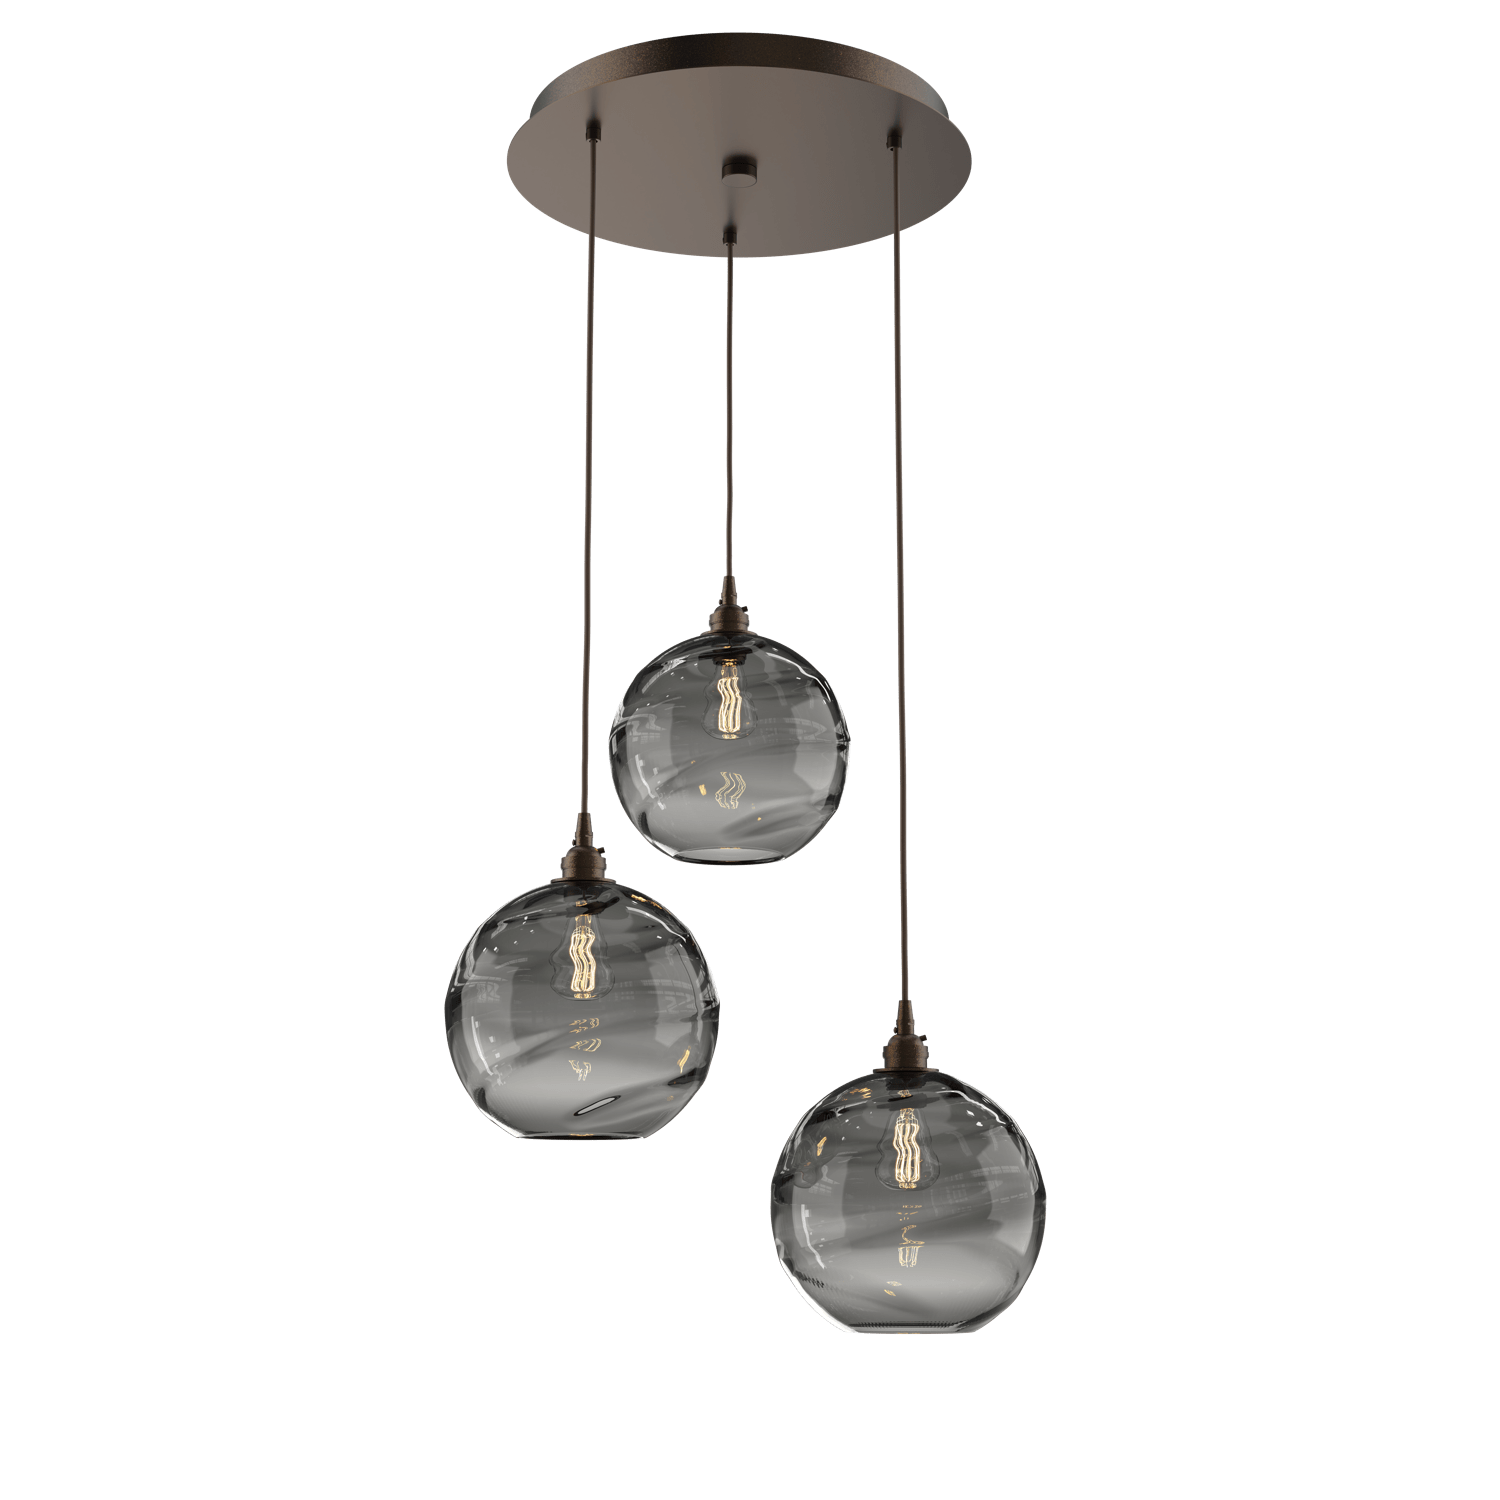 CHB0047-03-FB-OS-Hammerton-Studio-Optic-Blown-Glass-Terra-3-light-round-pendant-chandelier-with-flat-bronze-finish-and-optic-smoke-blown-glass-shades-and-incandescent-lamping